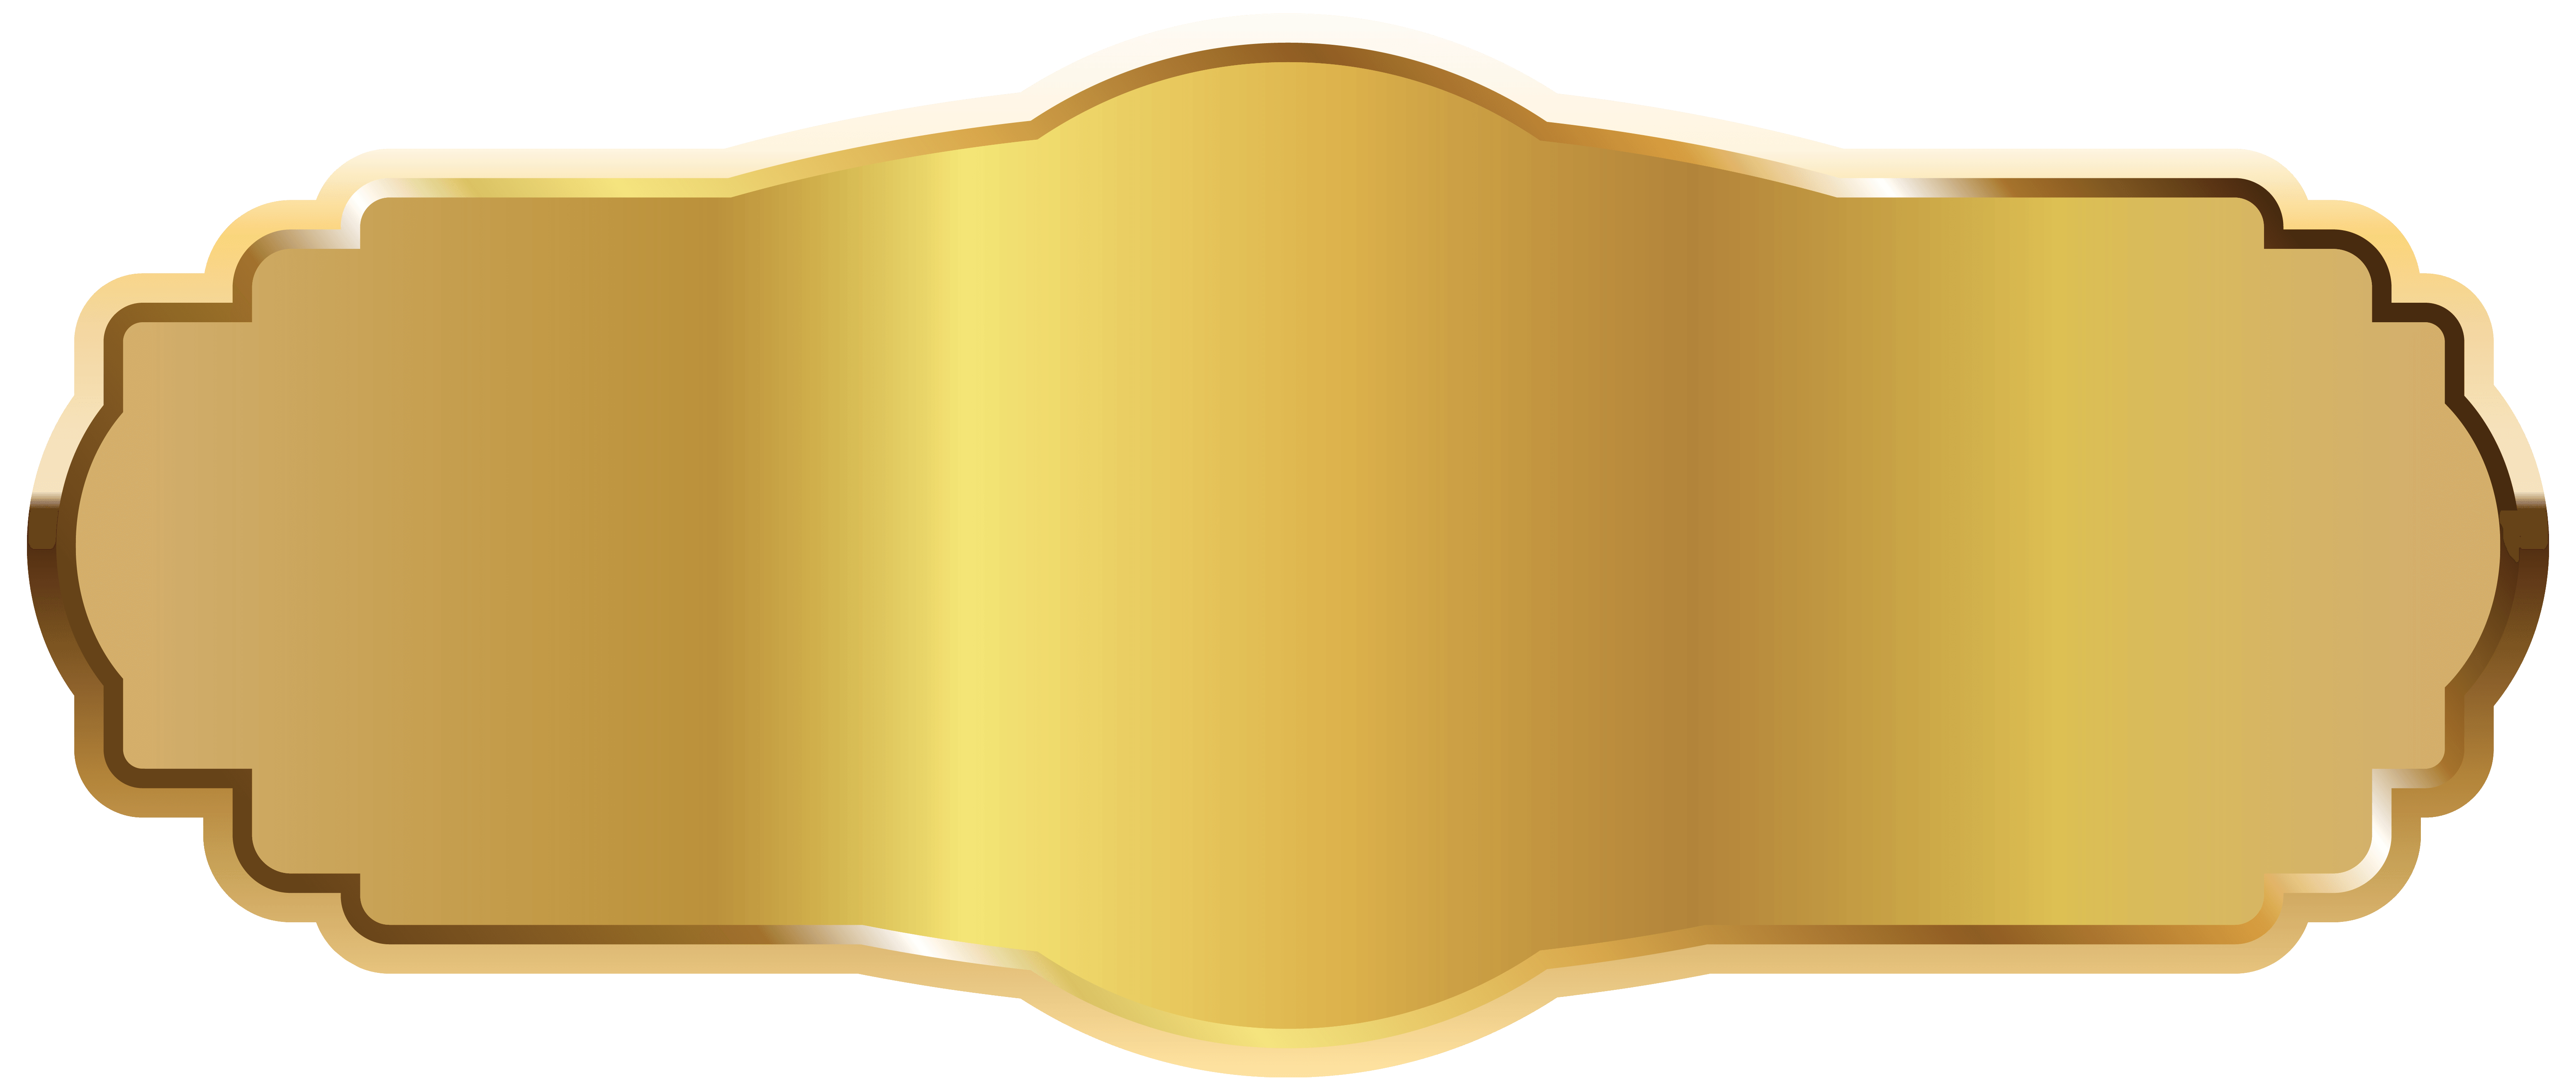 Free Gold Tag Cliparts, Download Free Clip Art, Free Clip